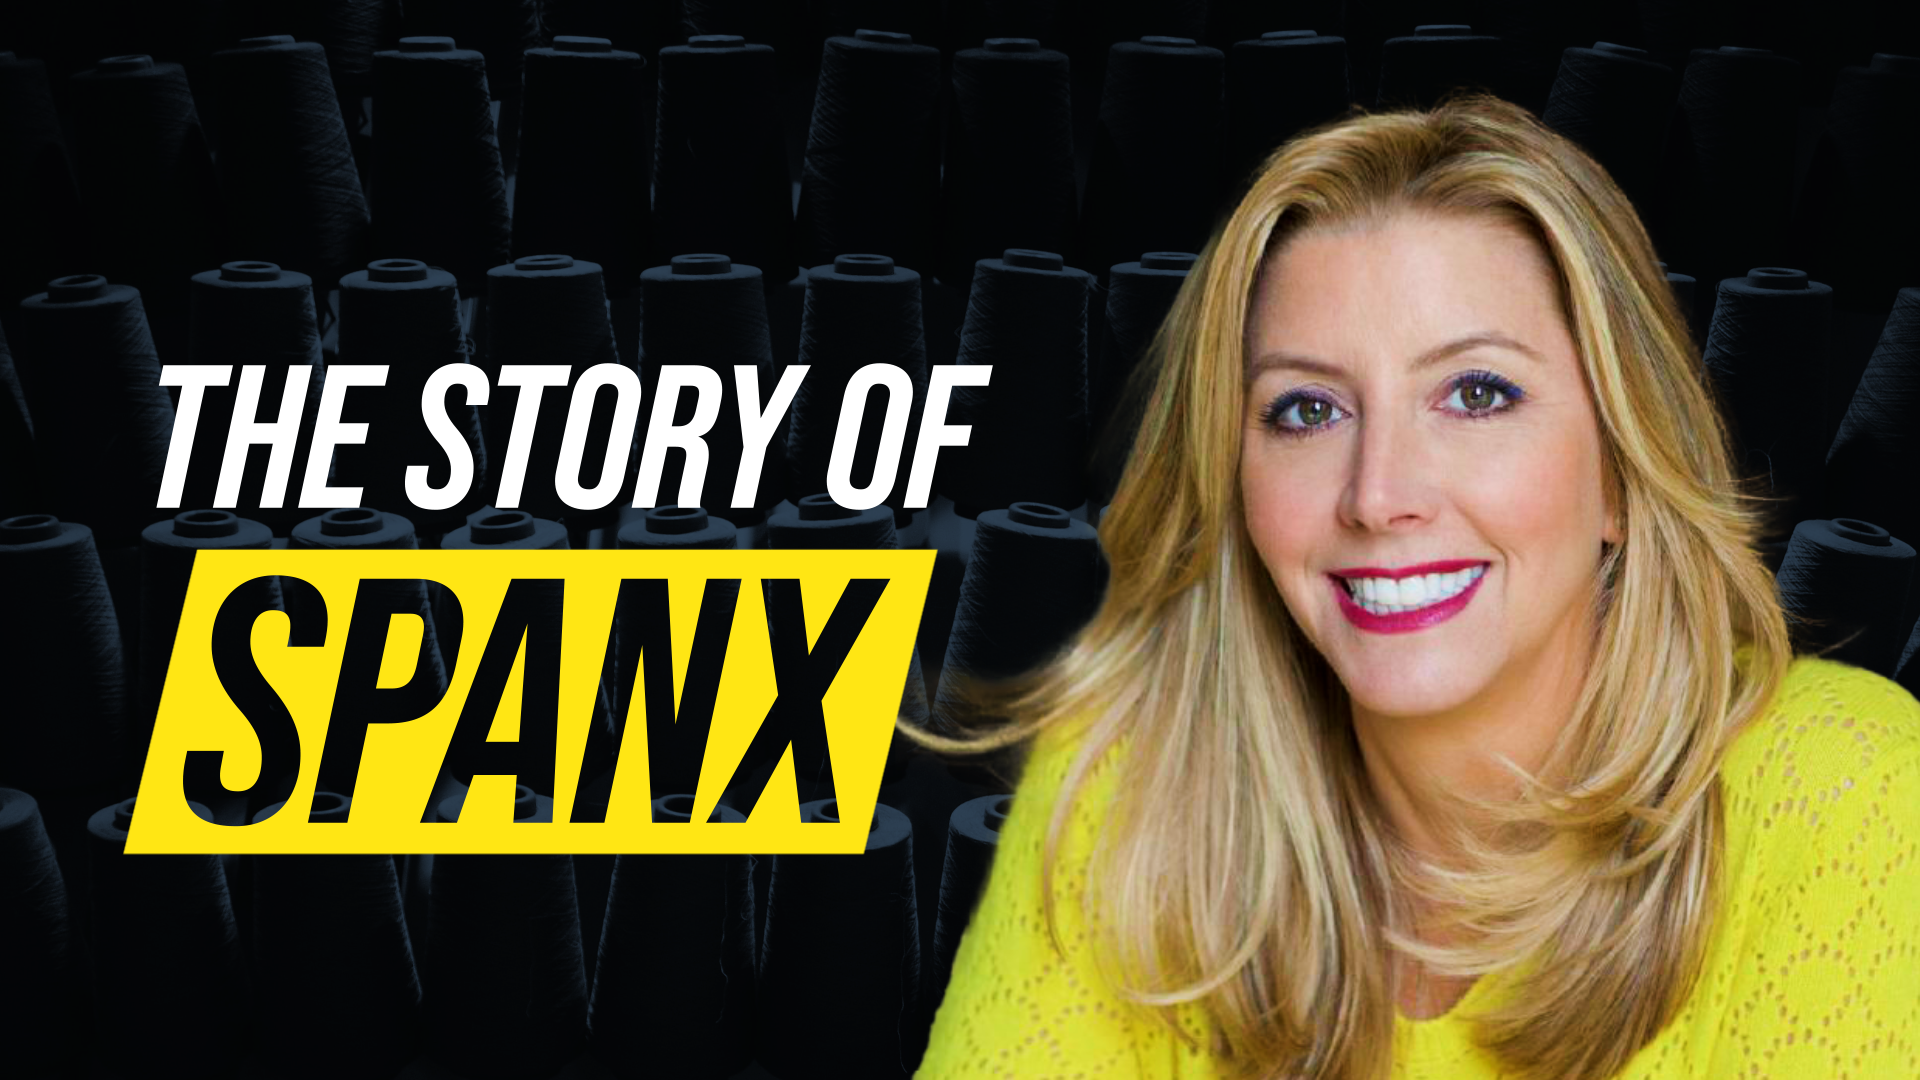 The Spanx Saga: How Sara Blakely Out-Witted Giants in the Shapewear World, by MarketingApt